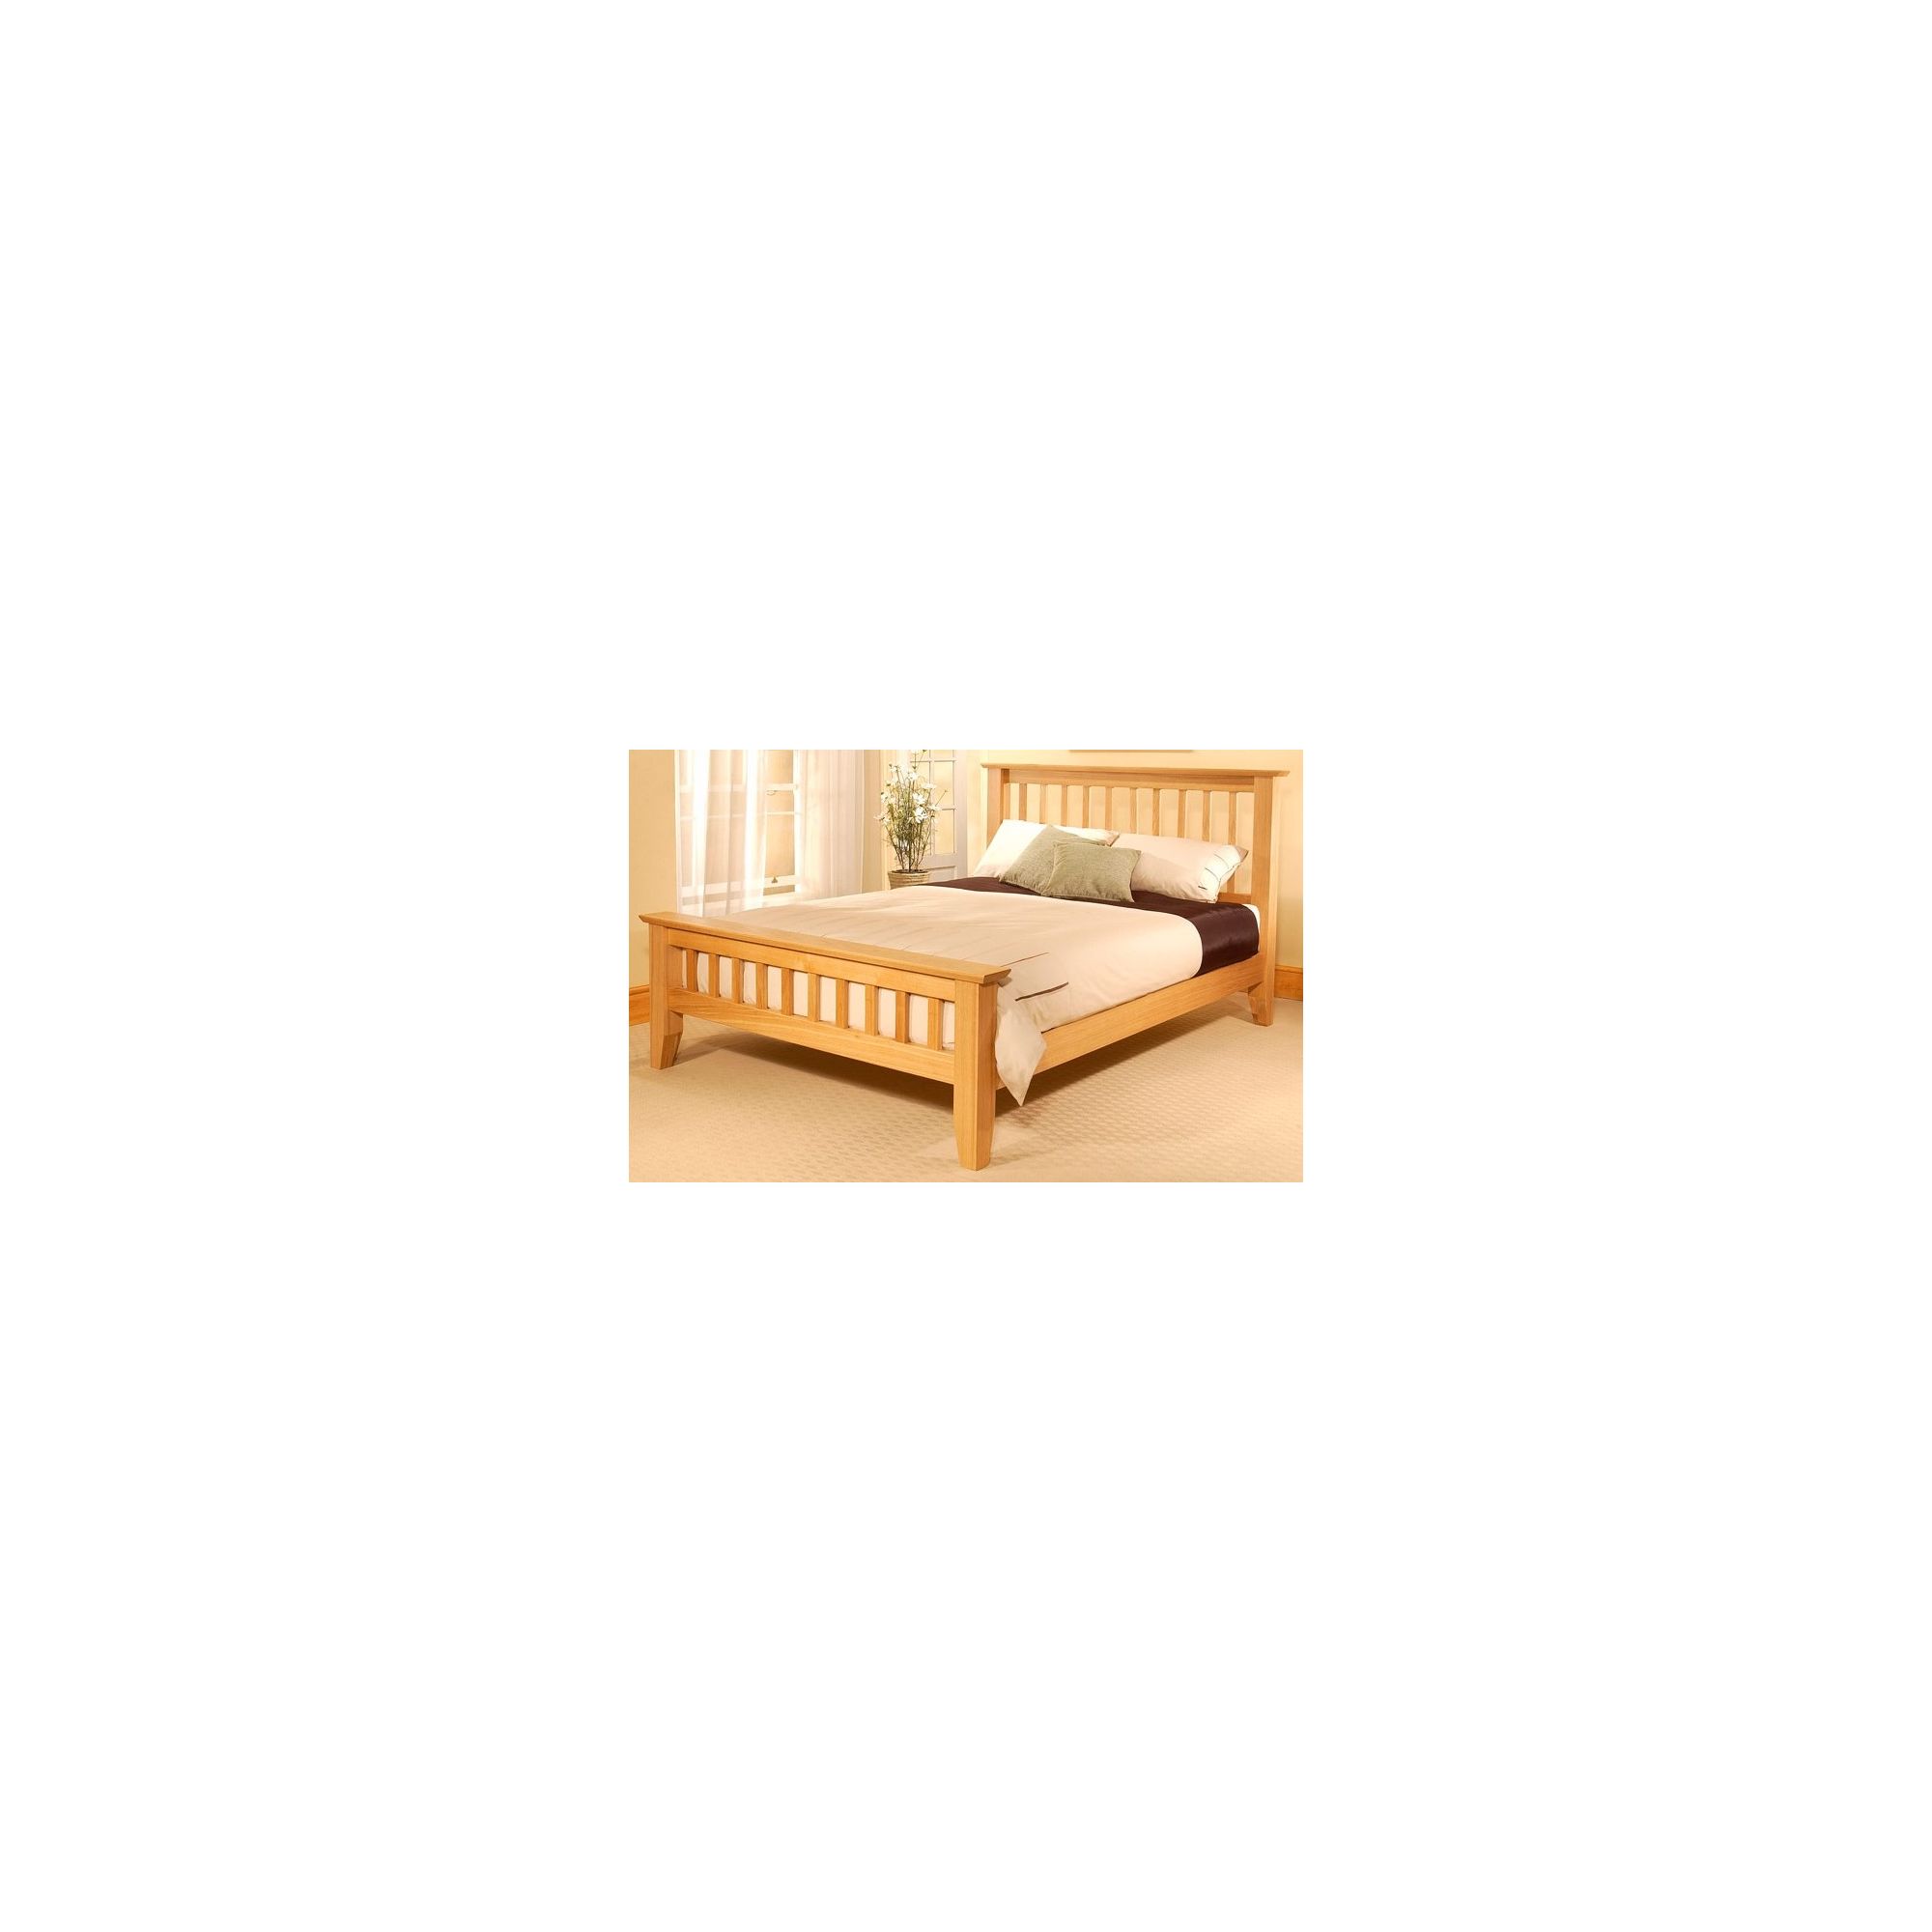 Limelight Phoebe Bed Frame - Double at Tesco Direct